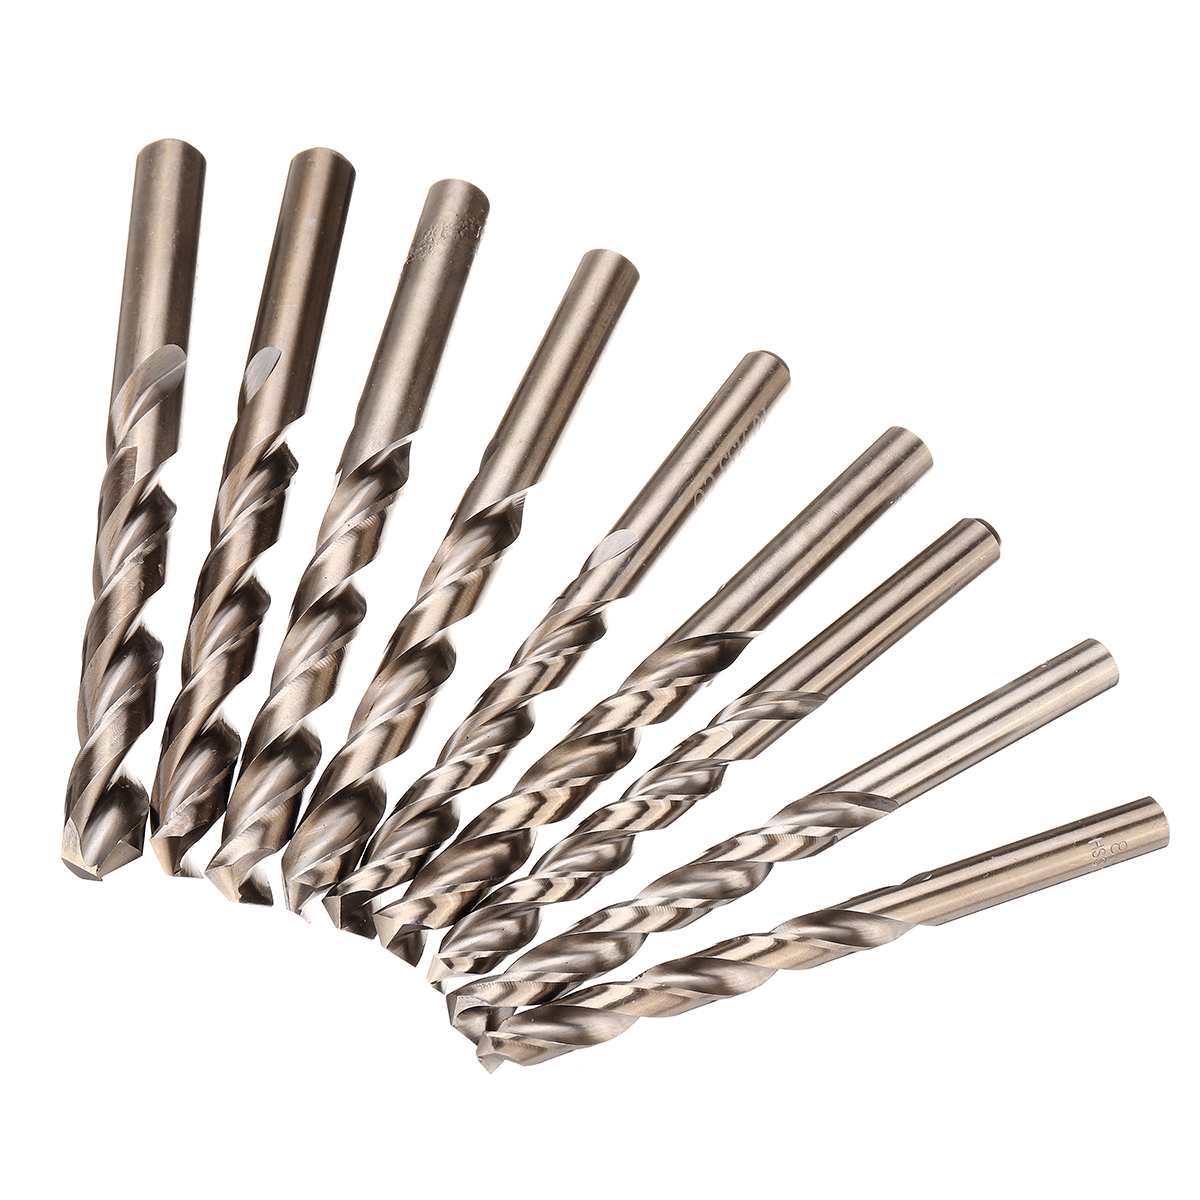 Drilling-Machines-Straigth-Shank-Wood-Tool-Auger-Twsist-Drill-Bit-Phi85-Phi13-1771356-6